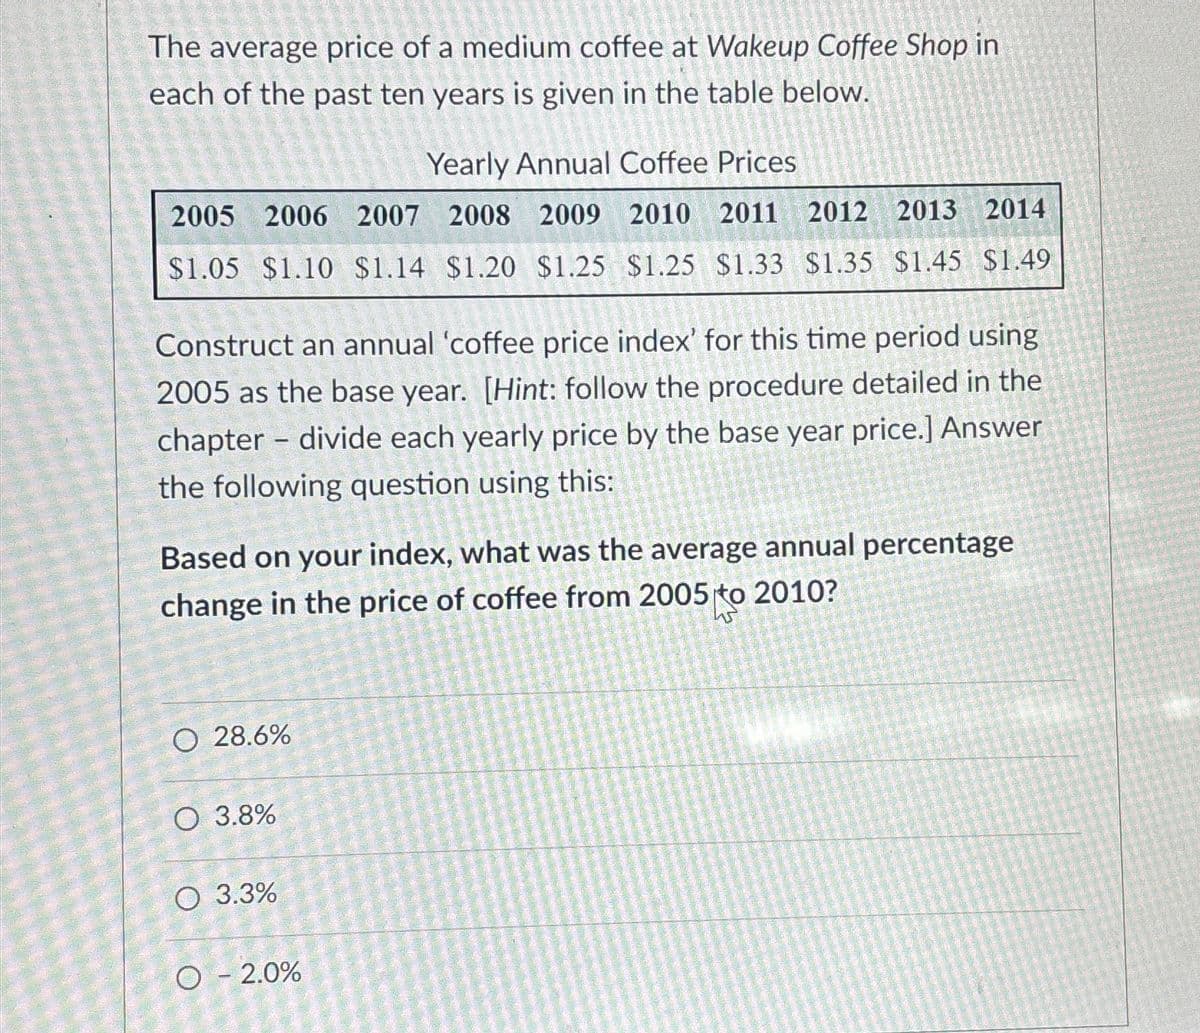 The average price of a medium coffee at Wakeup Coffee Shop in
each of the past ten years is given in the table below.
Yearly Annual Coffee Prices
2005 2006 2007 2008 2009 2010 2011 2012 2013 2014
$1.05 $1.10 $1.14 $1.20 $1.25 $1.25 $1.33 $1.35 $1.45 $1.49
Construct an annual 'coffee price index' for this time period using
2005 as the base year. [Hint: follow the procedure detailed in the
chapter divide each yearly price by the base year price.] Answer
the following question using this:
1
Based on your index, what was the average annual percentage
change in the price of coffee from 2005 to 2010?
O 28.6%
O 3.8%
O 3.3%
O - 2.0%